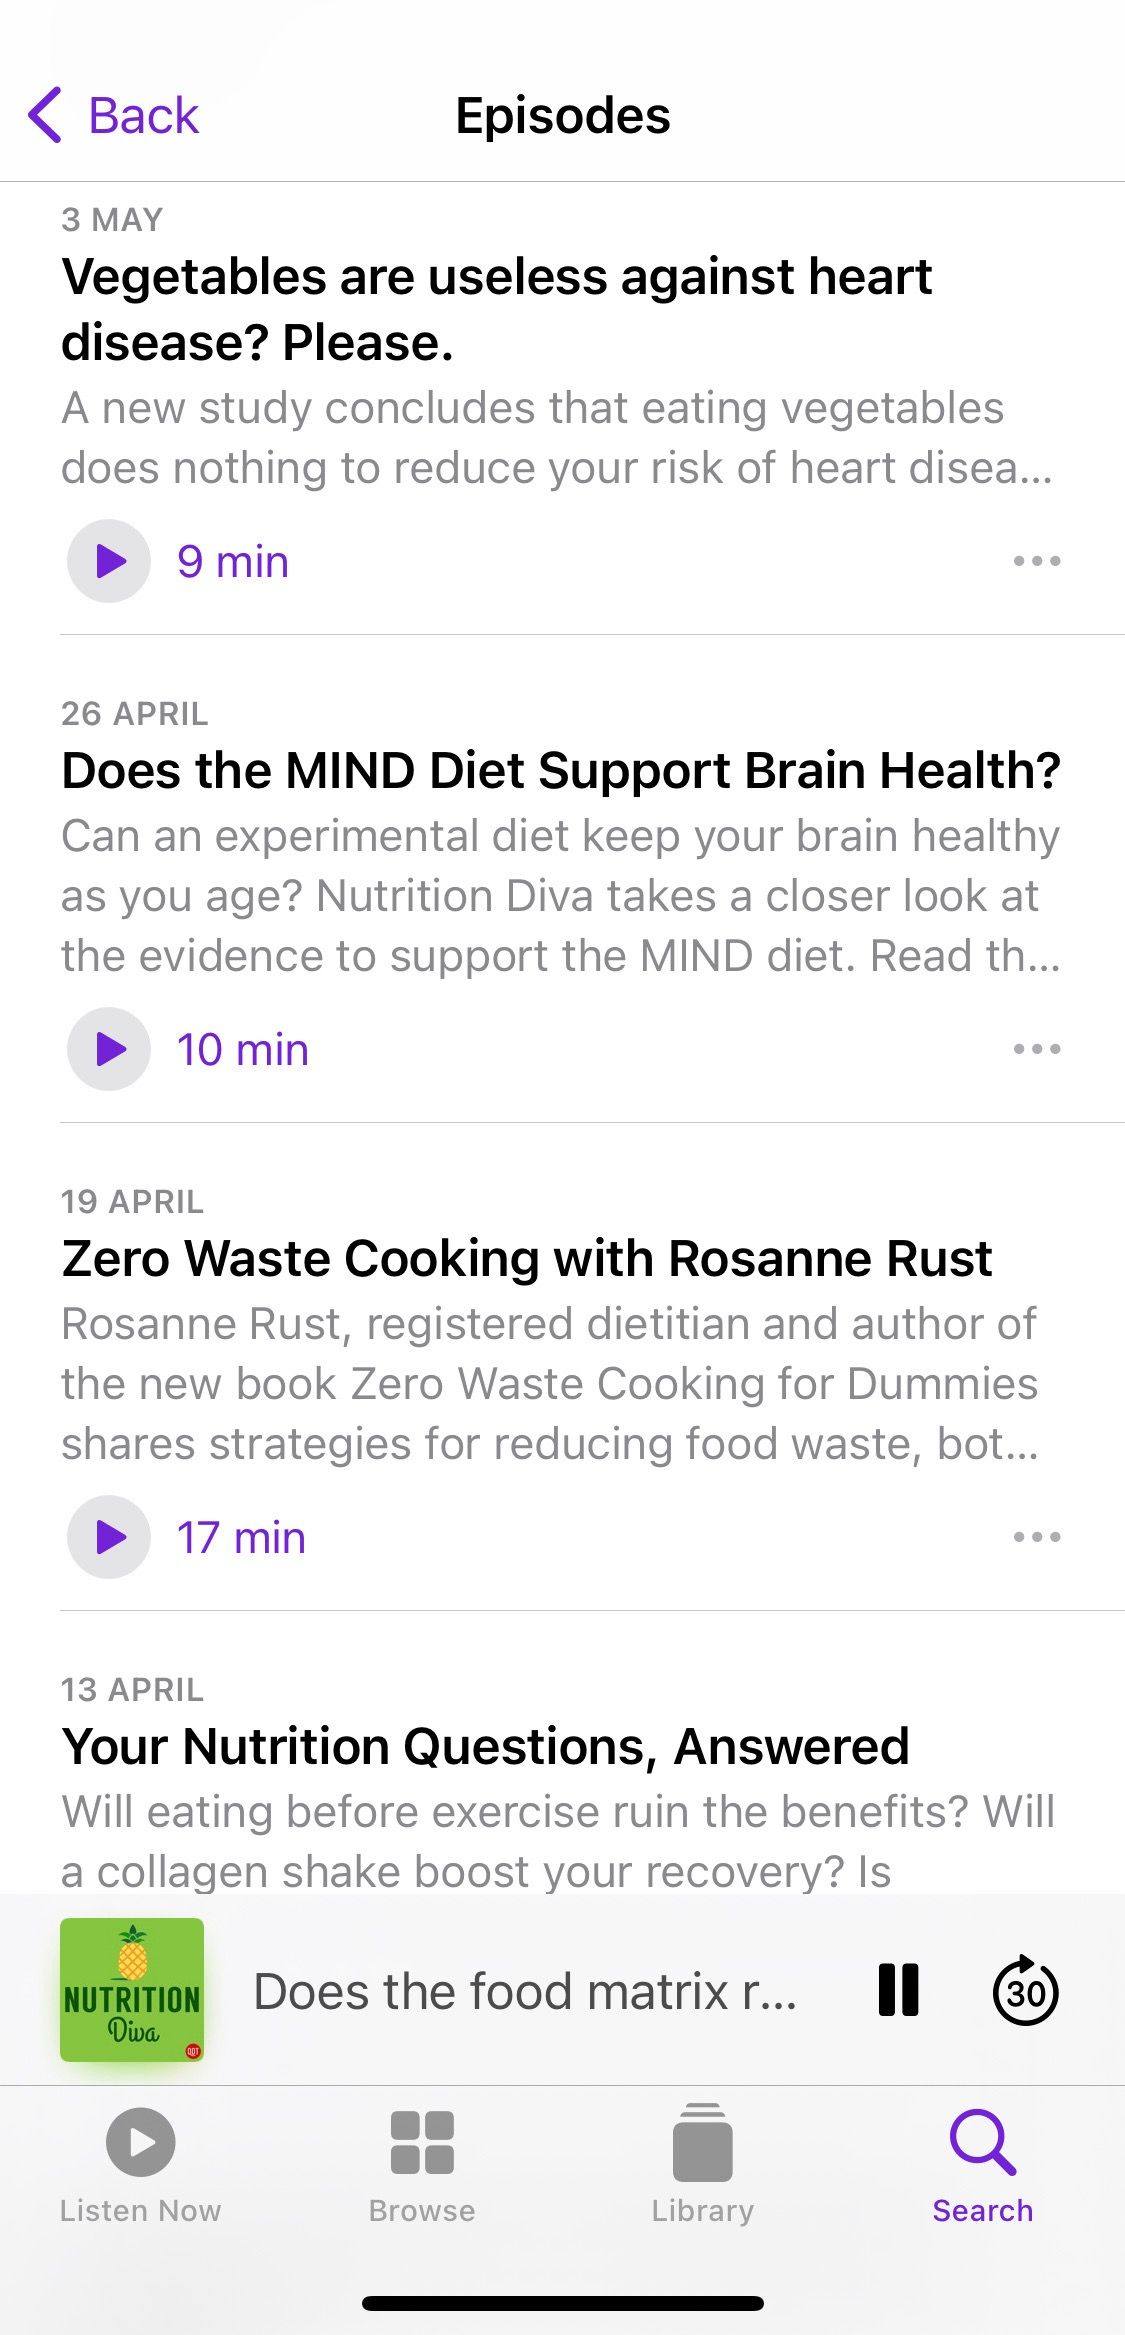 Screenshot from Nutrition Diva podcast showing sample episodes